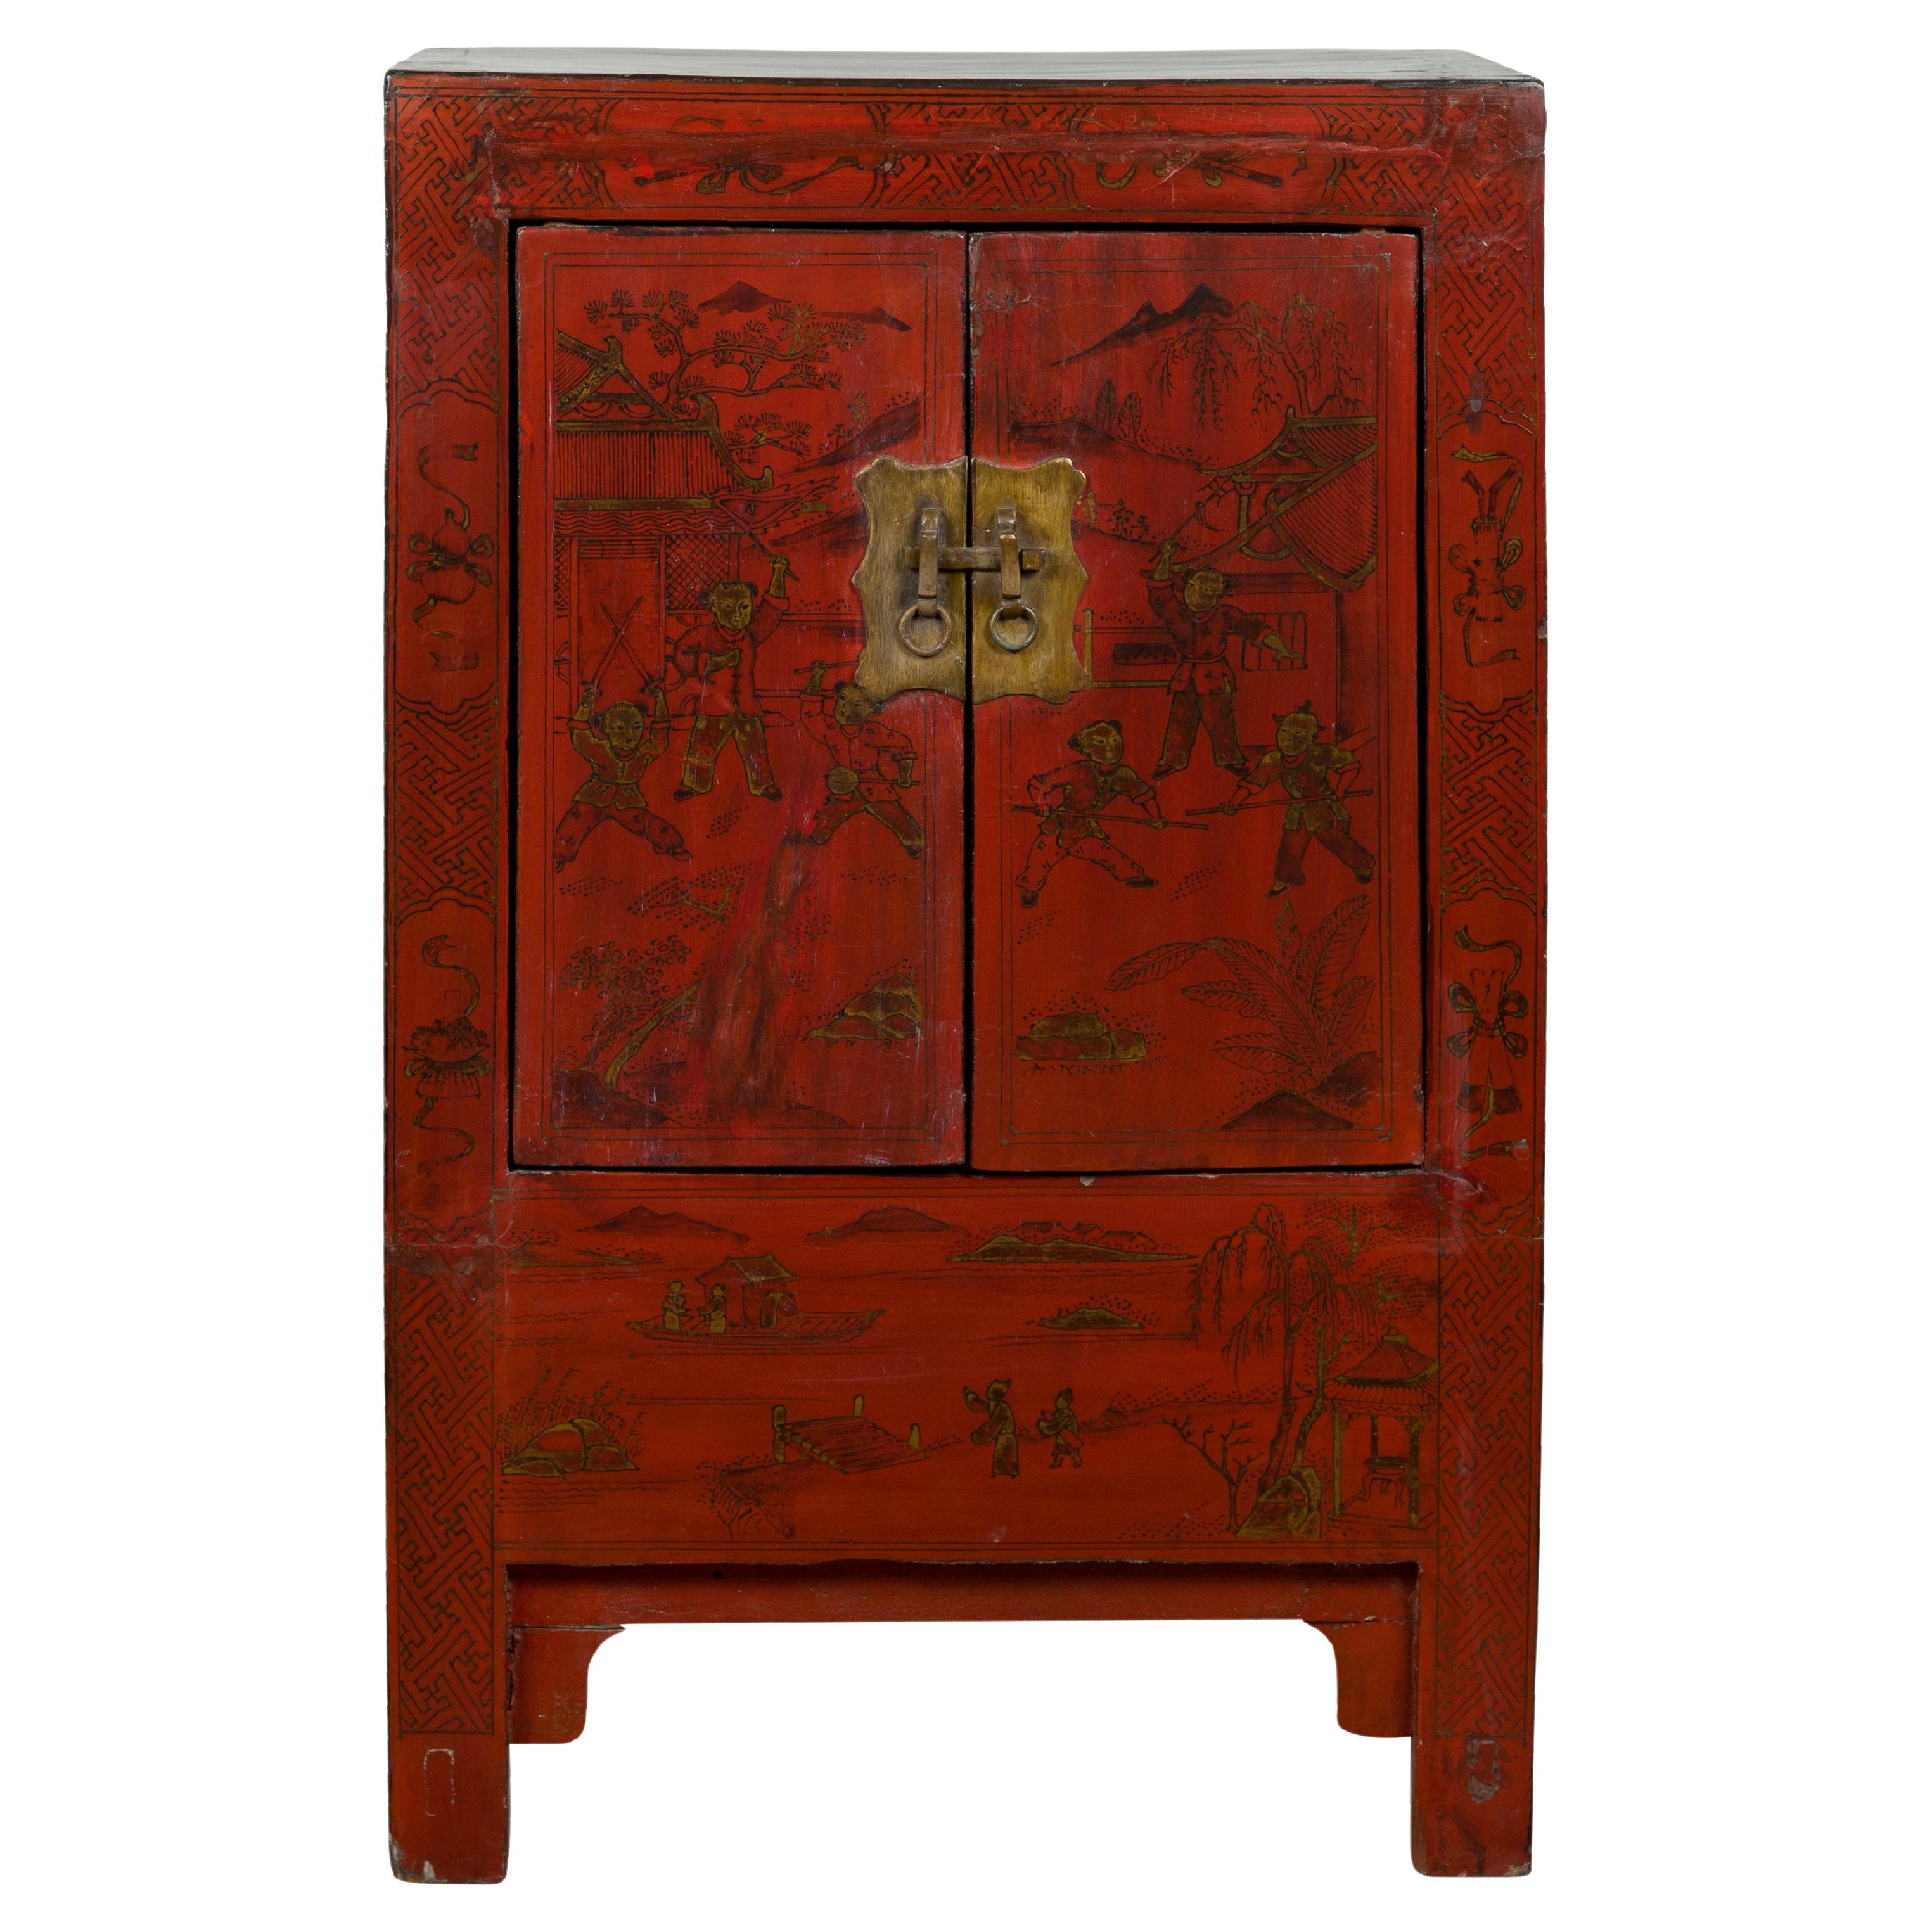 Chinese Qing Dynasty Period Red Lacquer Bedside Cabinet with Hand-Painted Décor For Sale